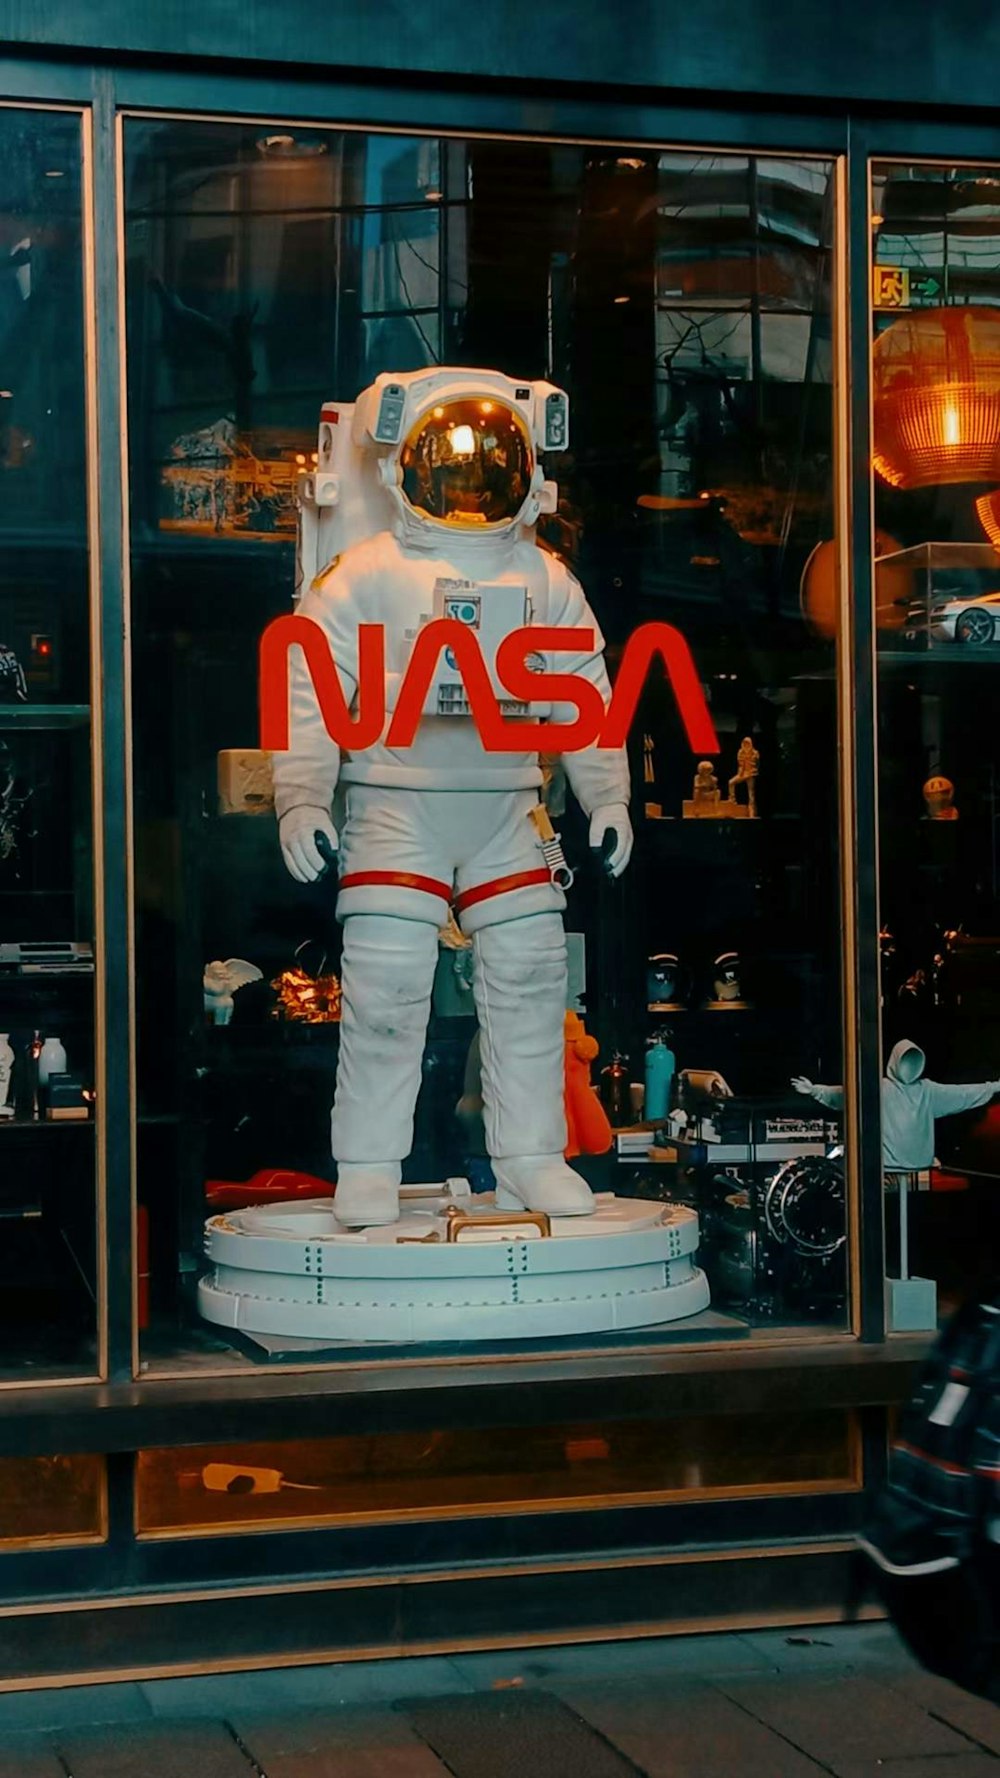 a window display of a nasa suit and helmet